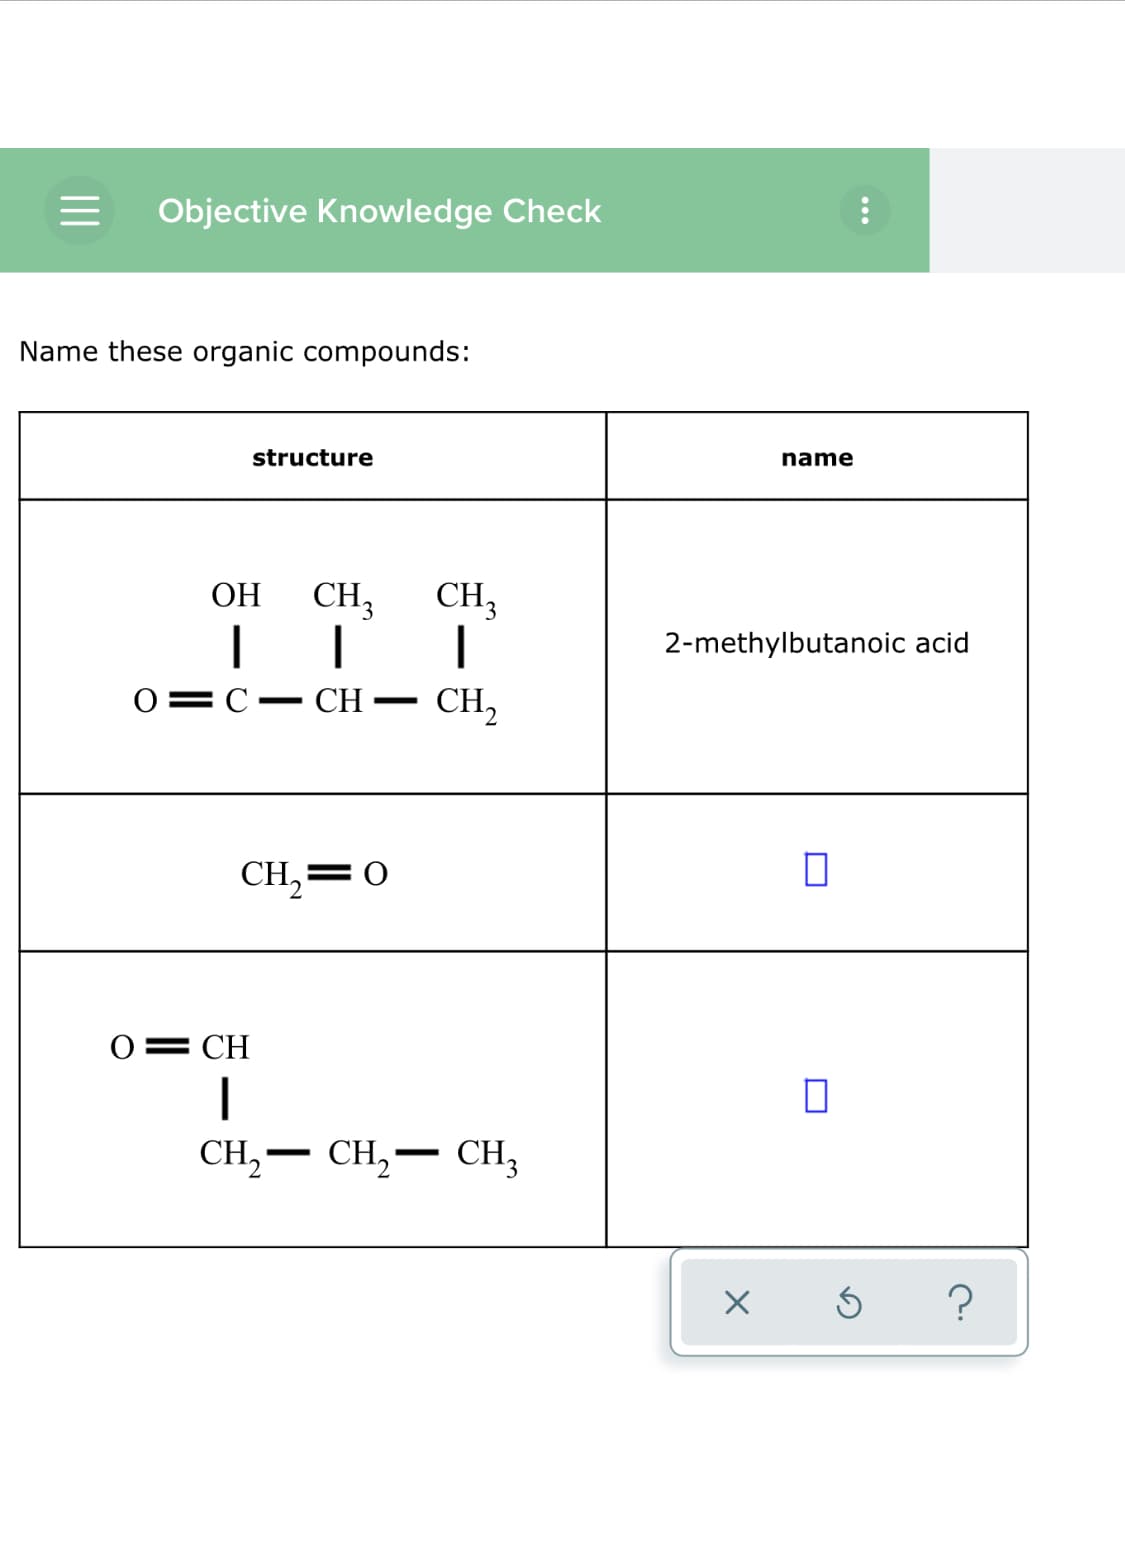 Objective Knowledge Check
Name these organic compounds:
name
structure
ОН
CH,
CH3
2-methylbutanoic acid
0=C•
CH
CH,
|
CH,=0
0= CH
CH, –
CH,-
CH3
-
